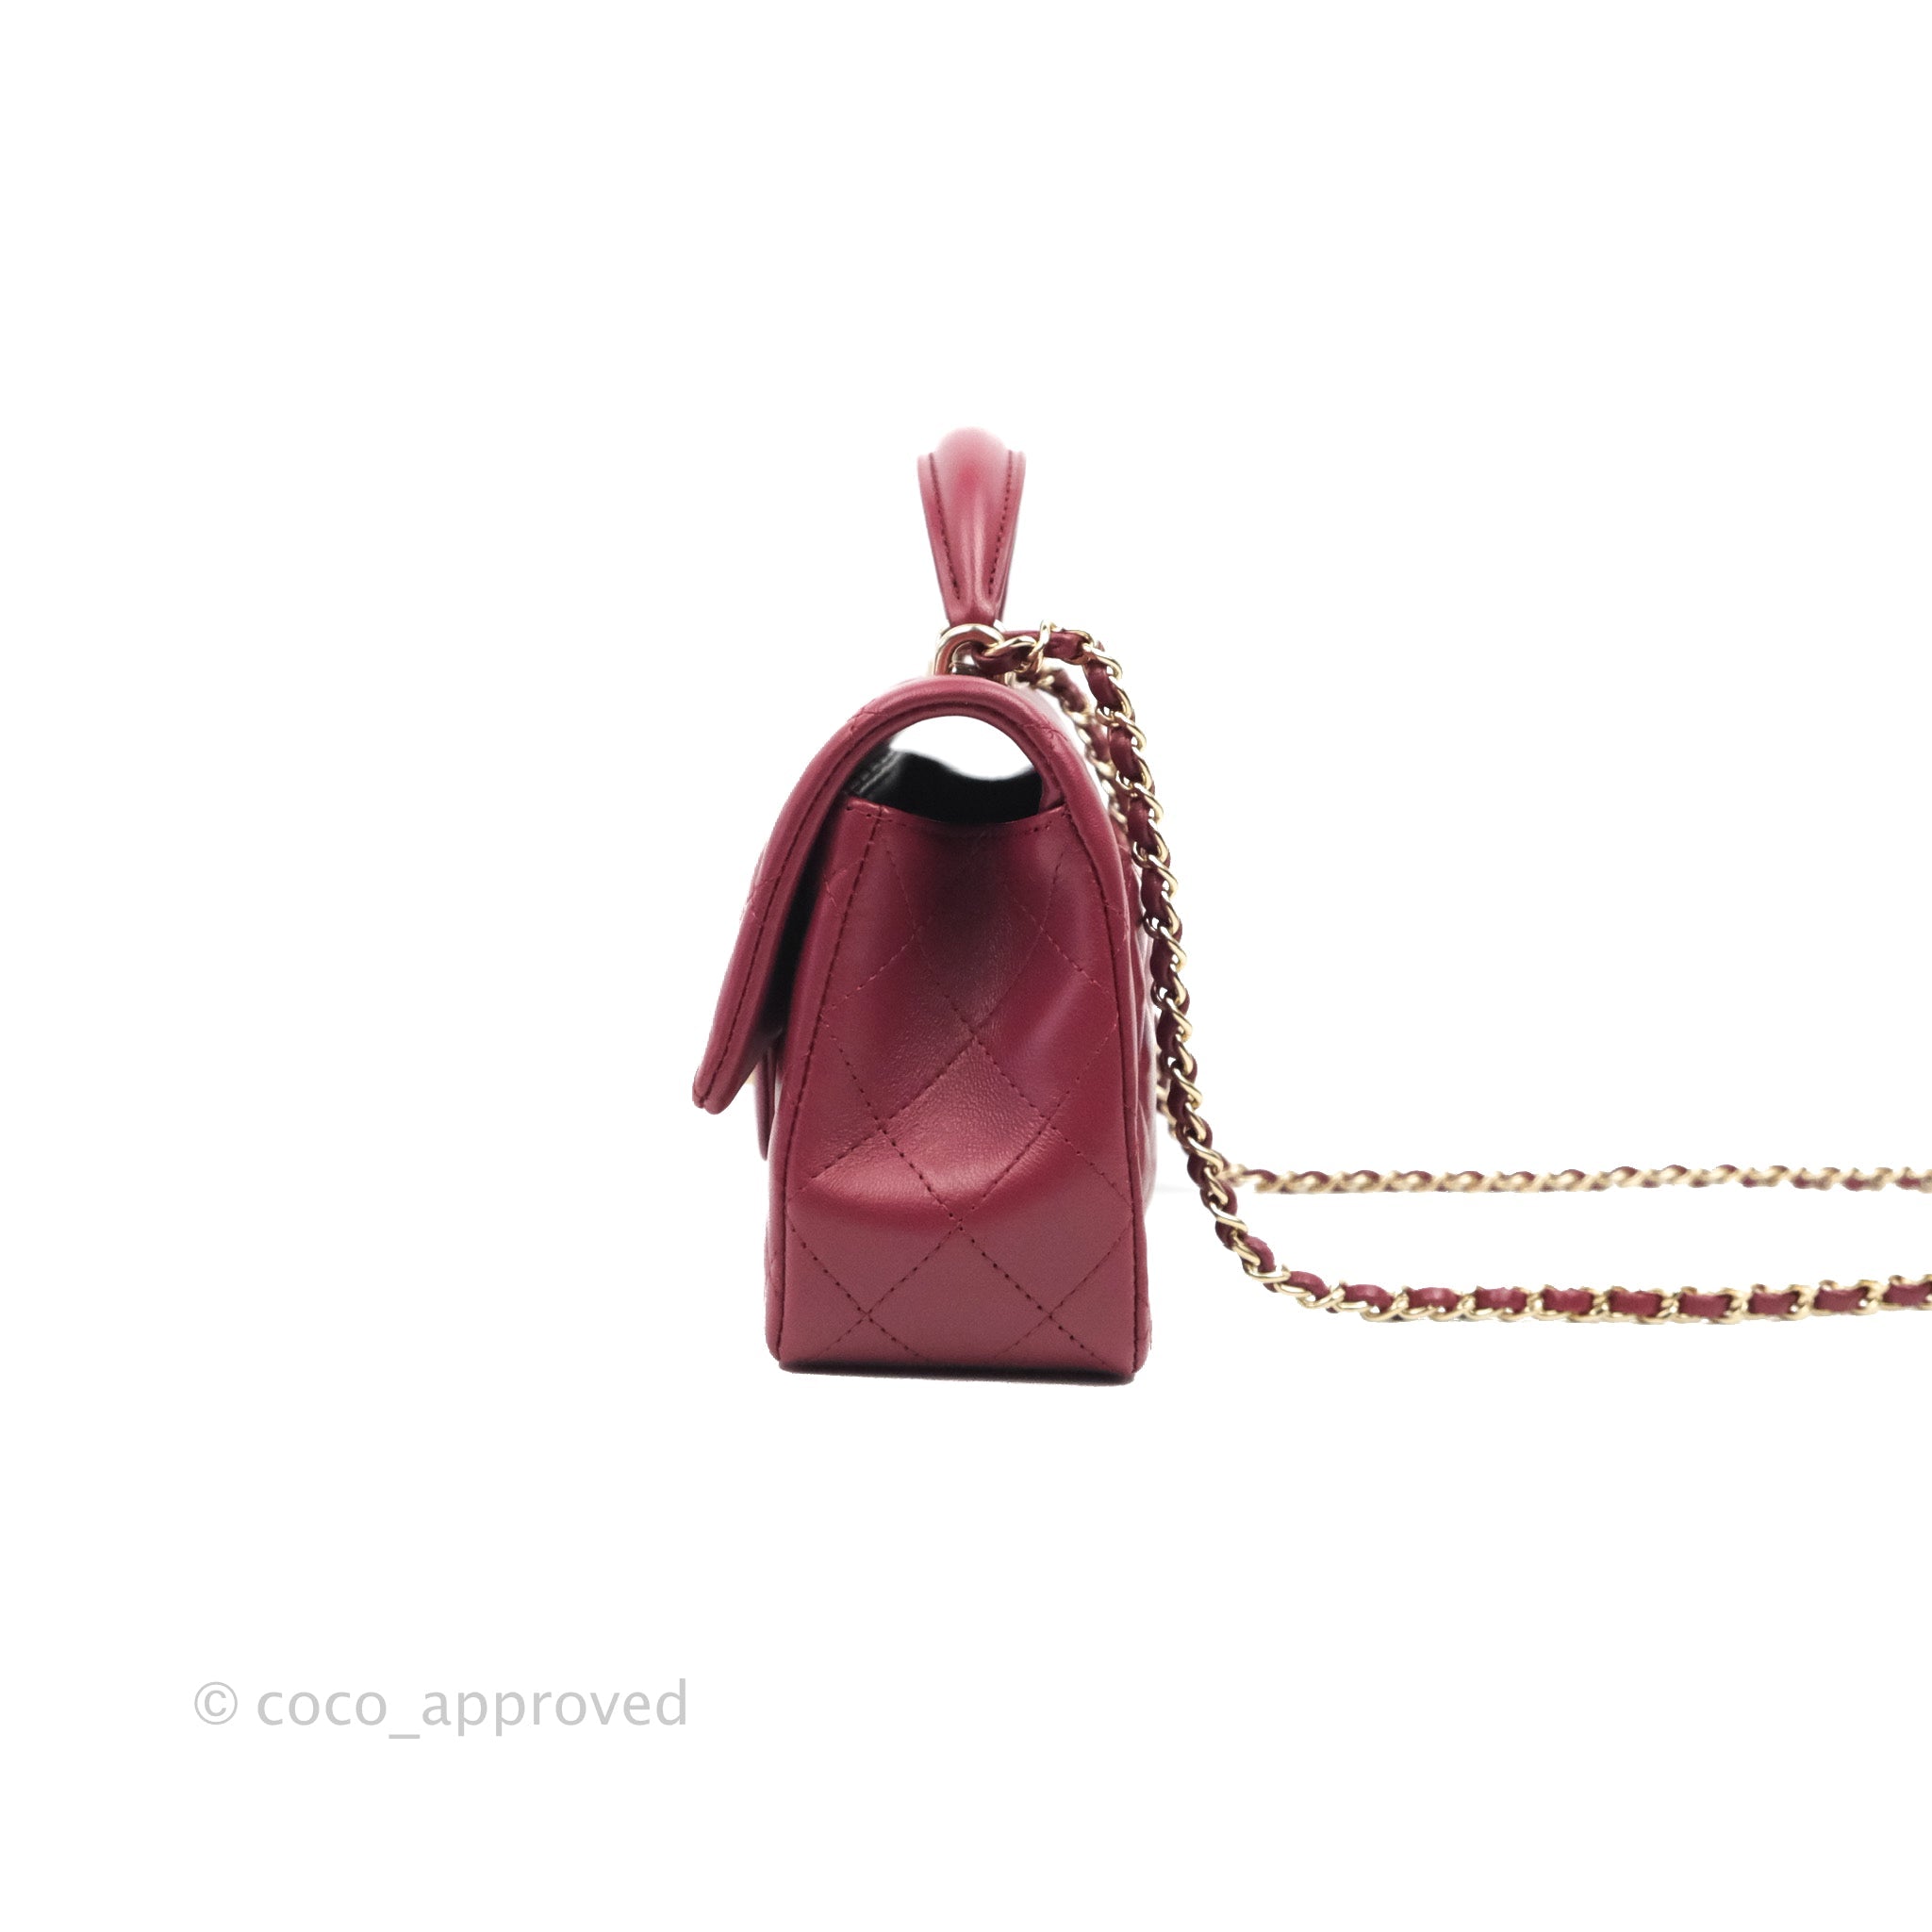 Maxi Classic Flap Bag in Black and Burgundy Colours in Lambskin with 24k  gold plated hardware Chanel 1994  1997  Handbags and Accessories Online   Ecommerce Retail  Sothebys